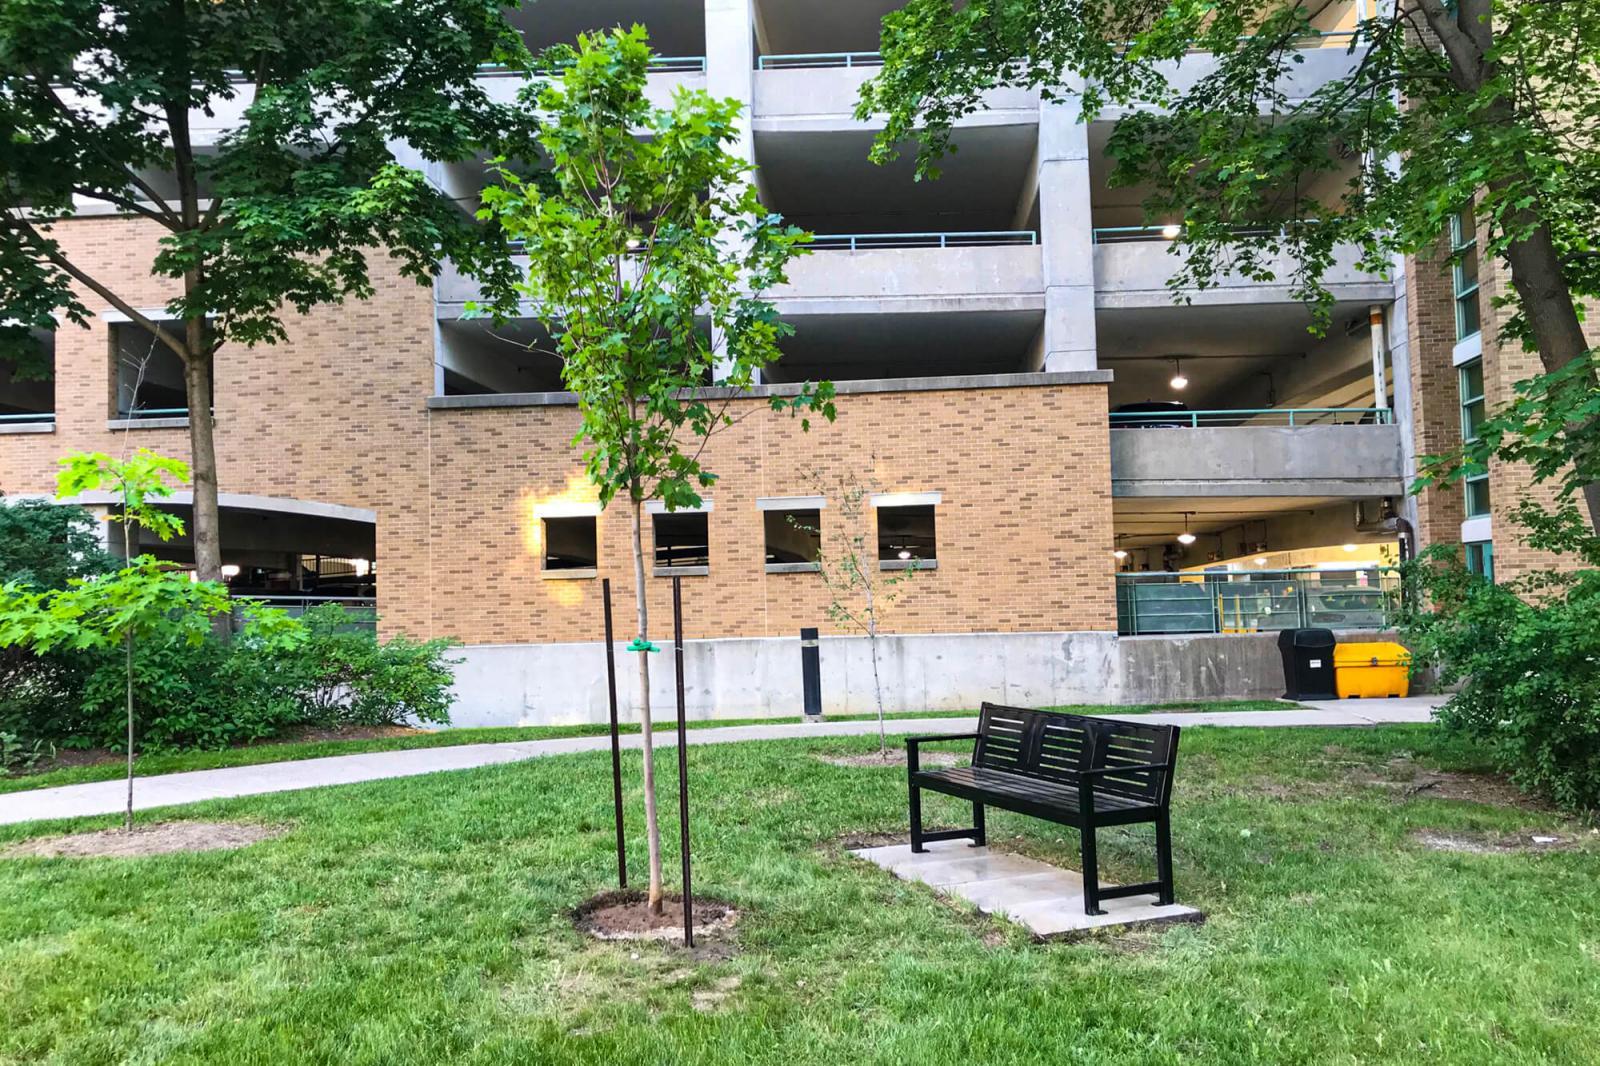 The first installation of 1bench1tree took place at Sunnybrook Hosptial in June 2021.